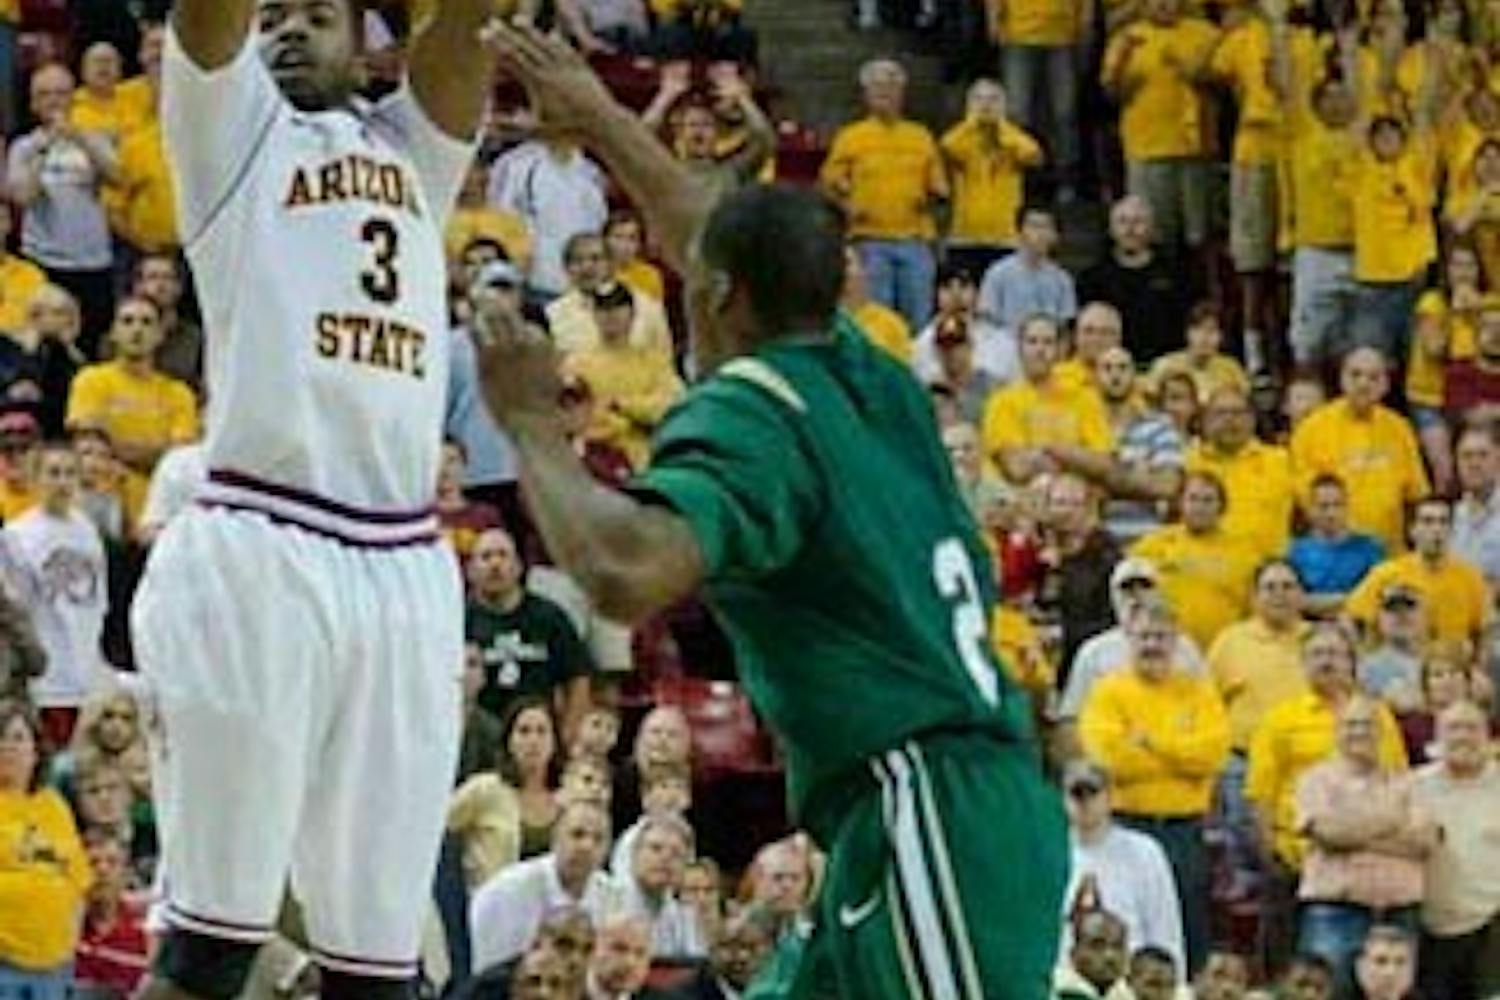 CLUTCH: ASU senior guard Ty Abbot, who hobbled from a knee injury earlier in the game, goes up for the game winning 3-point shot with 2.2 seconds remaining in the Sun Devils' 69-66 victory over the UAB Blazers on Saturday. (Photo by Aaron Lavinsky)